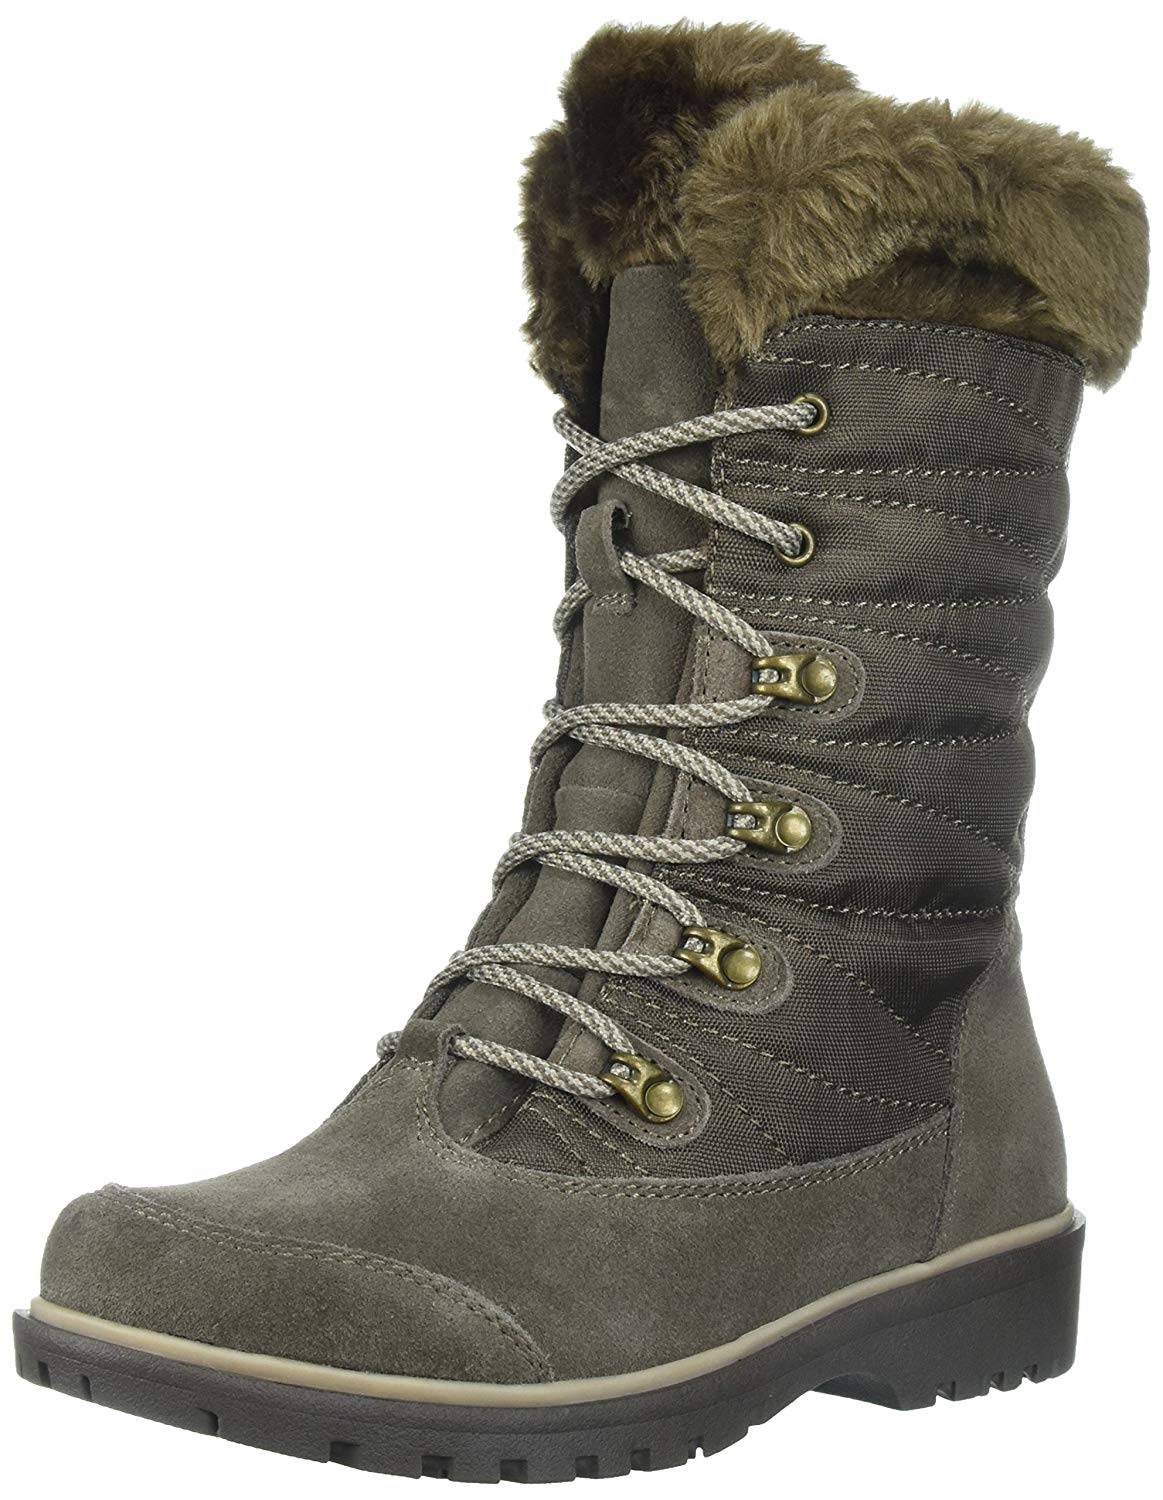 Bare Traps Womens Satin Leather Round Toe Mid-Calf Cold Weather, Mud ...